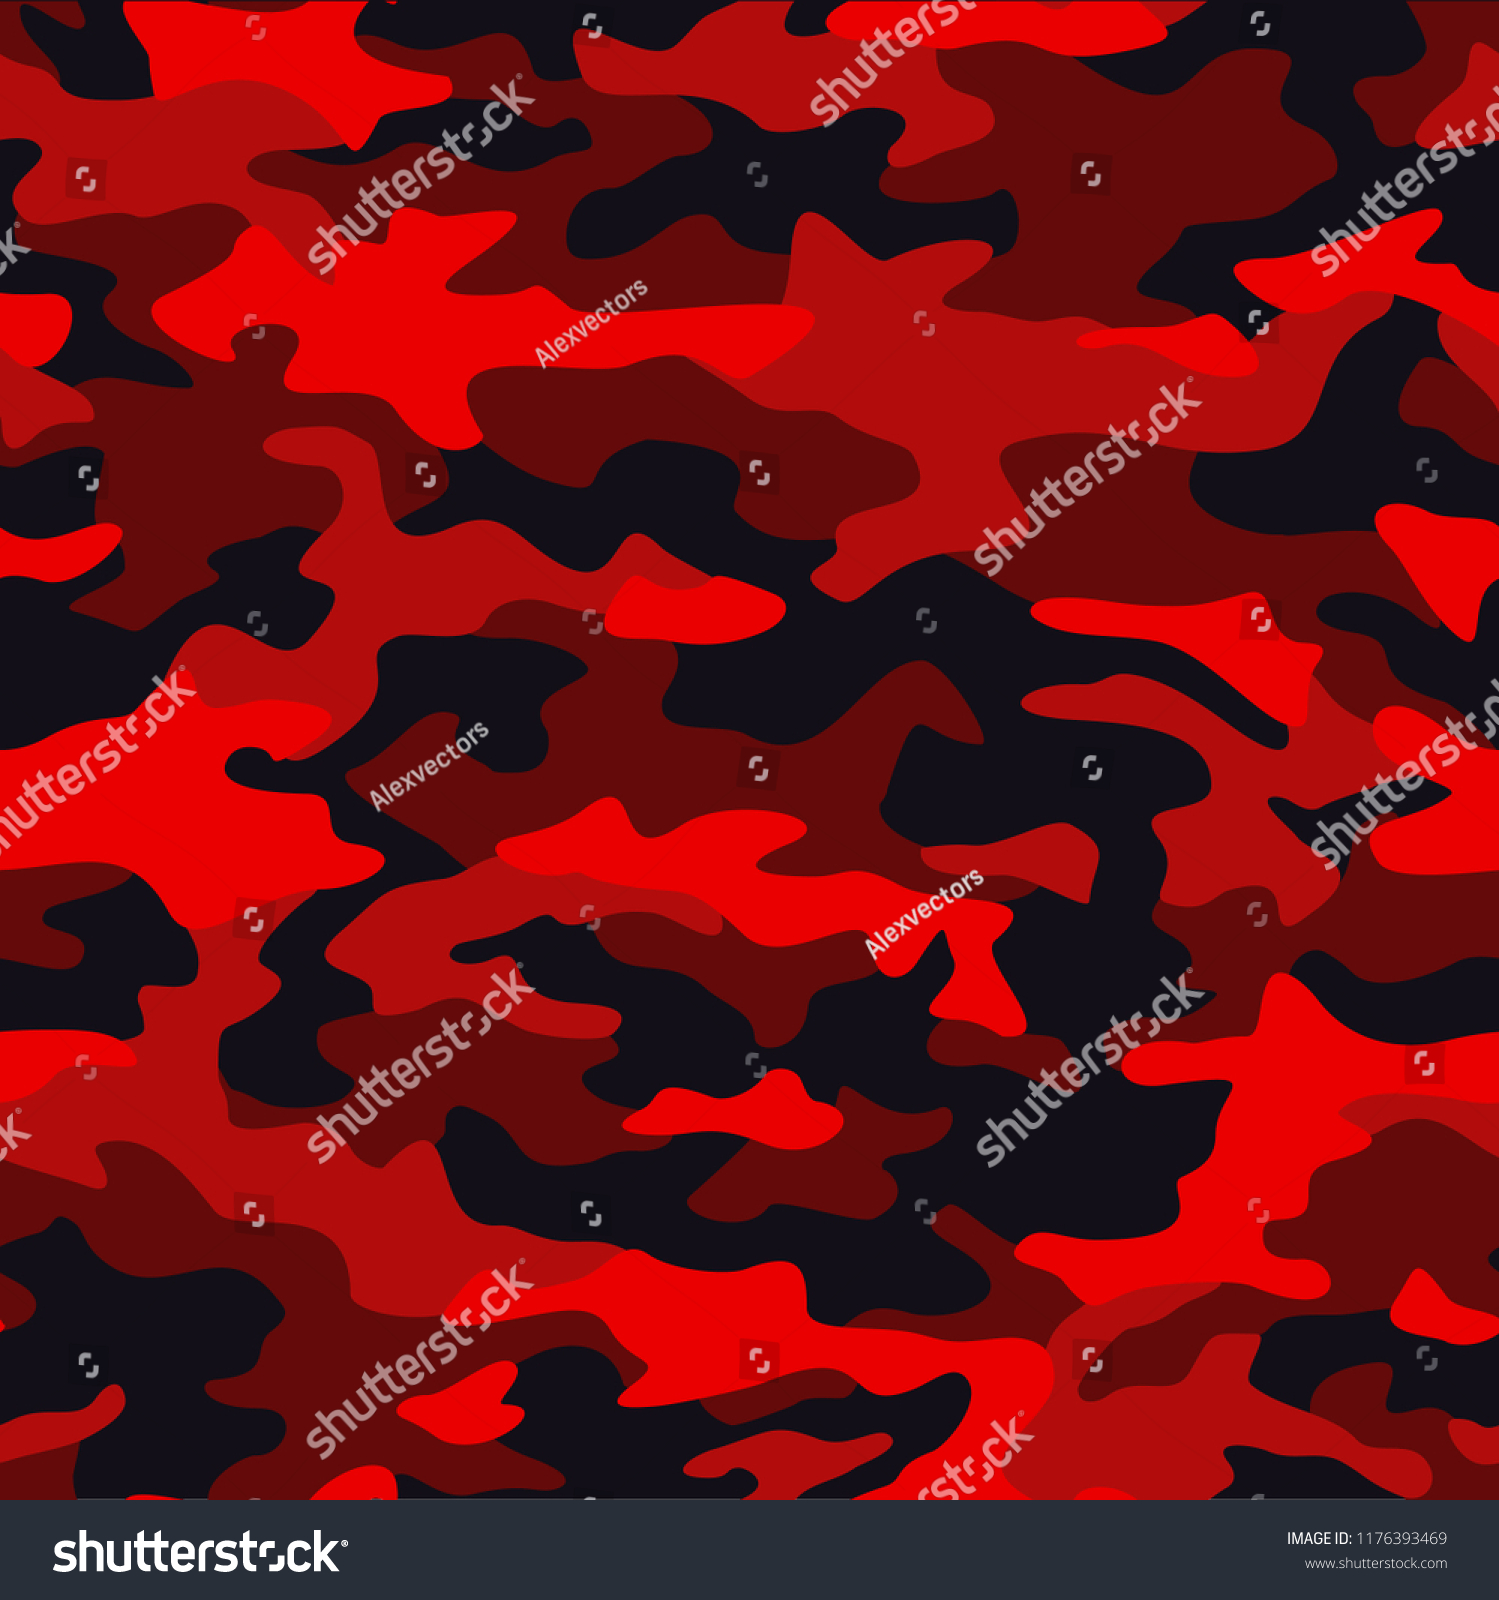 Red-army Images, Stock Photos & Vectors | Shutterstock